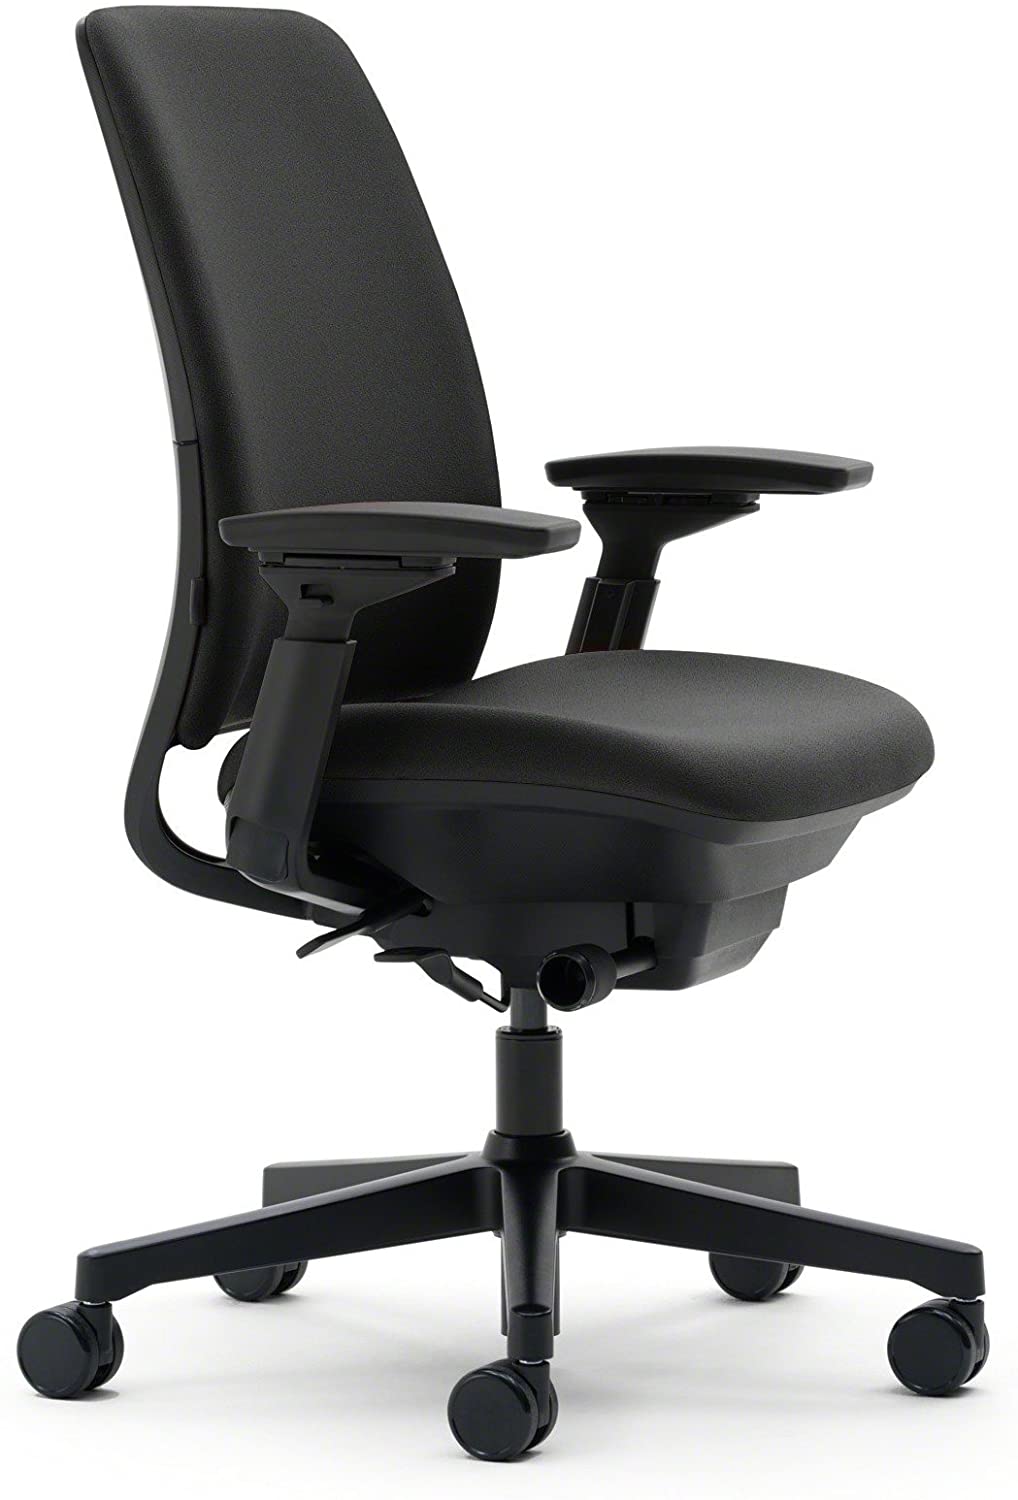 steelcase_amia_office_chair